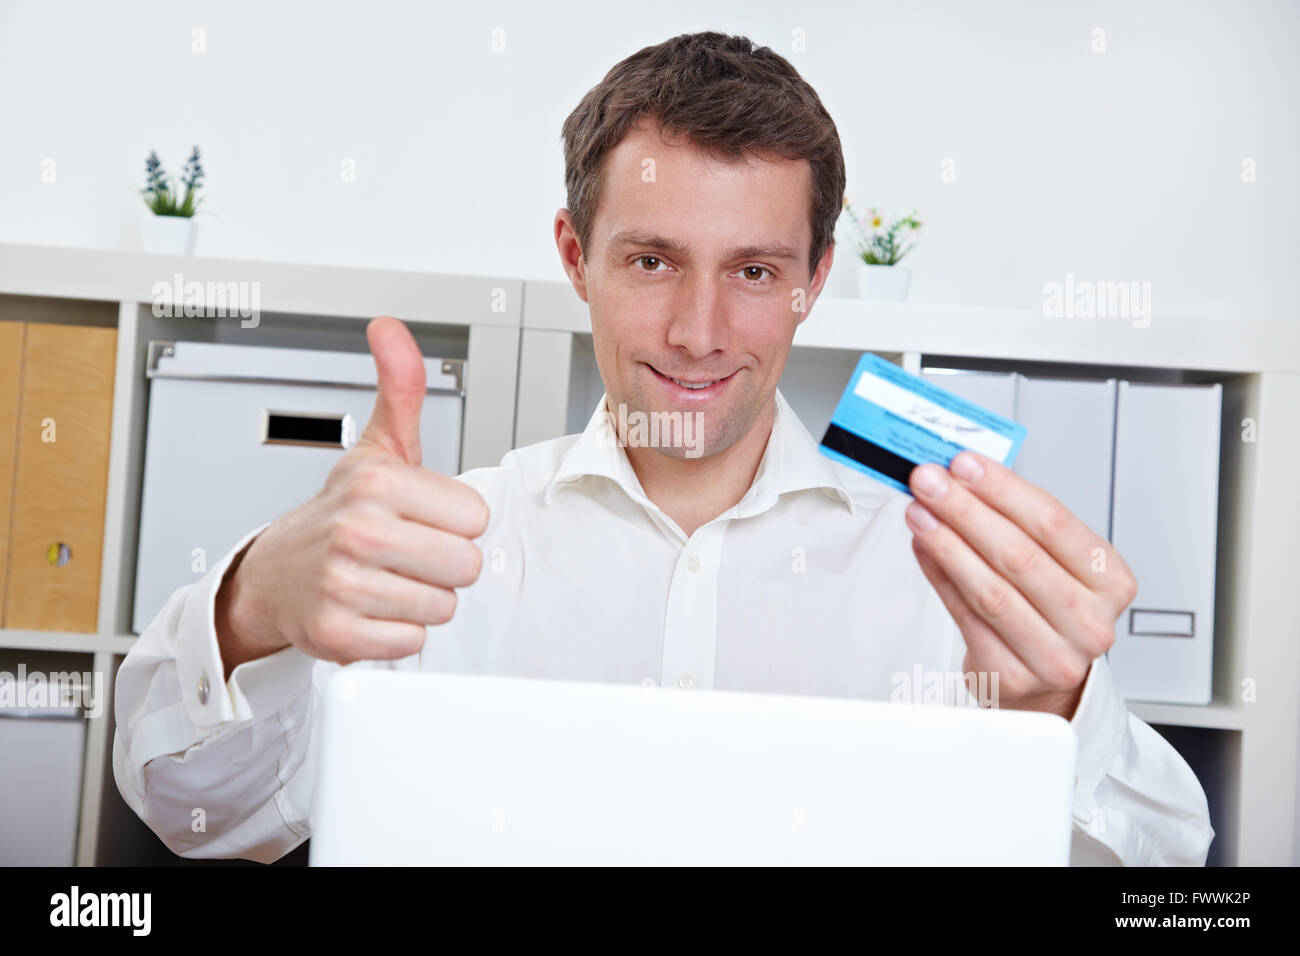 Happy business man with credit card holding thumbs up in the office Stock Photo